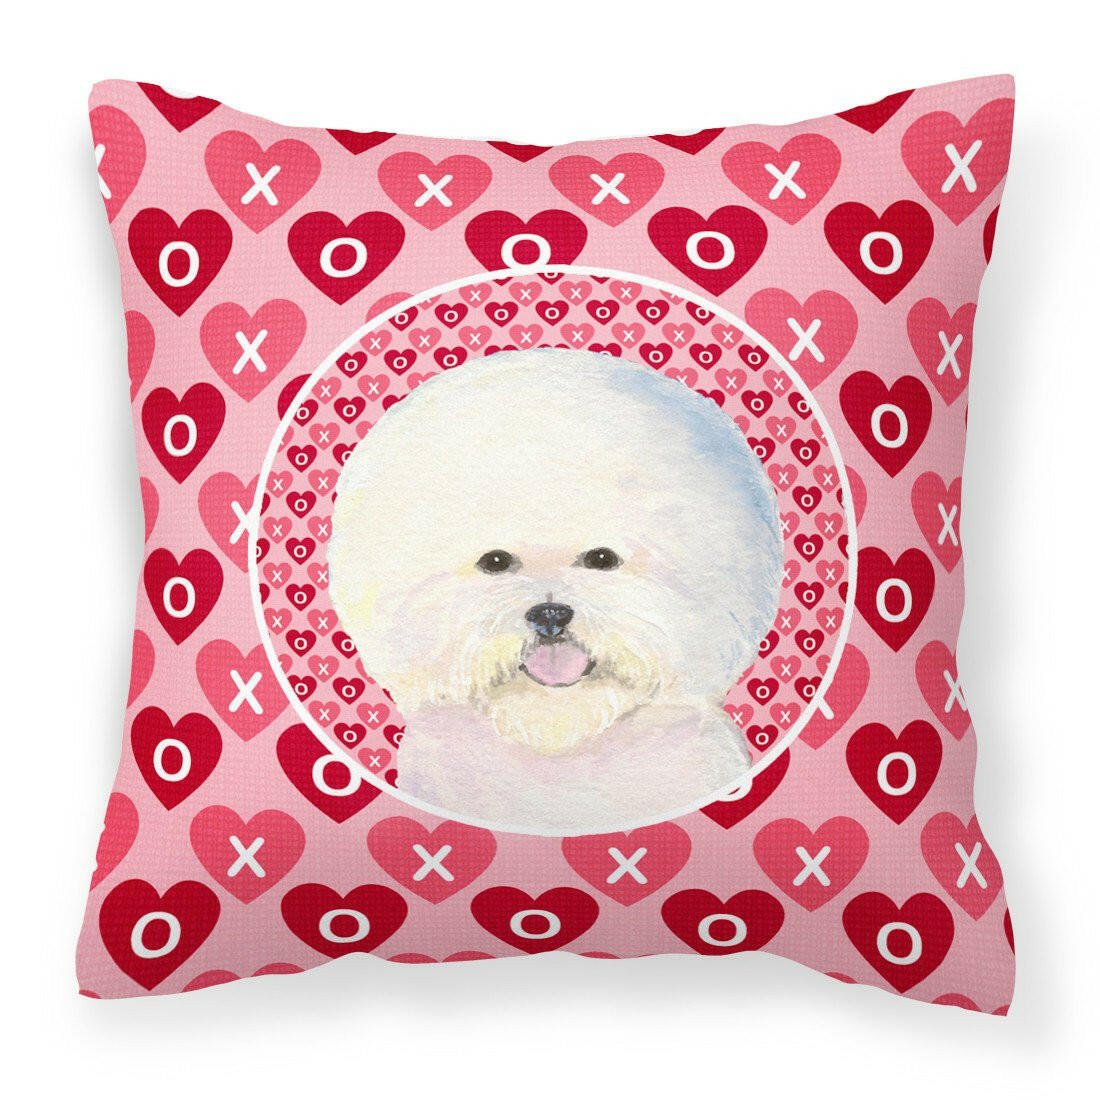 Bichon Frise Hearts Love and Valentine's Day Portrait Fabric Decorative Pillow SS4526PW1414 by Caroline's Treasures